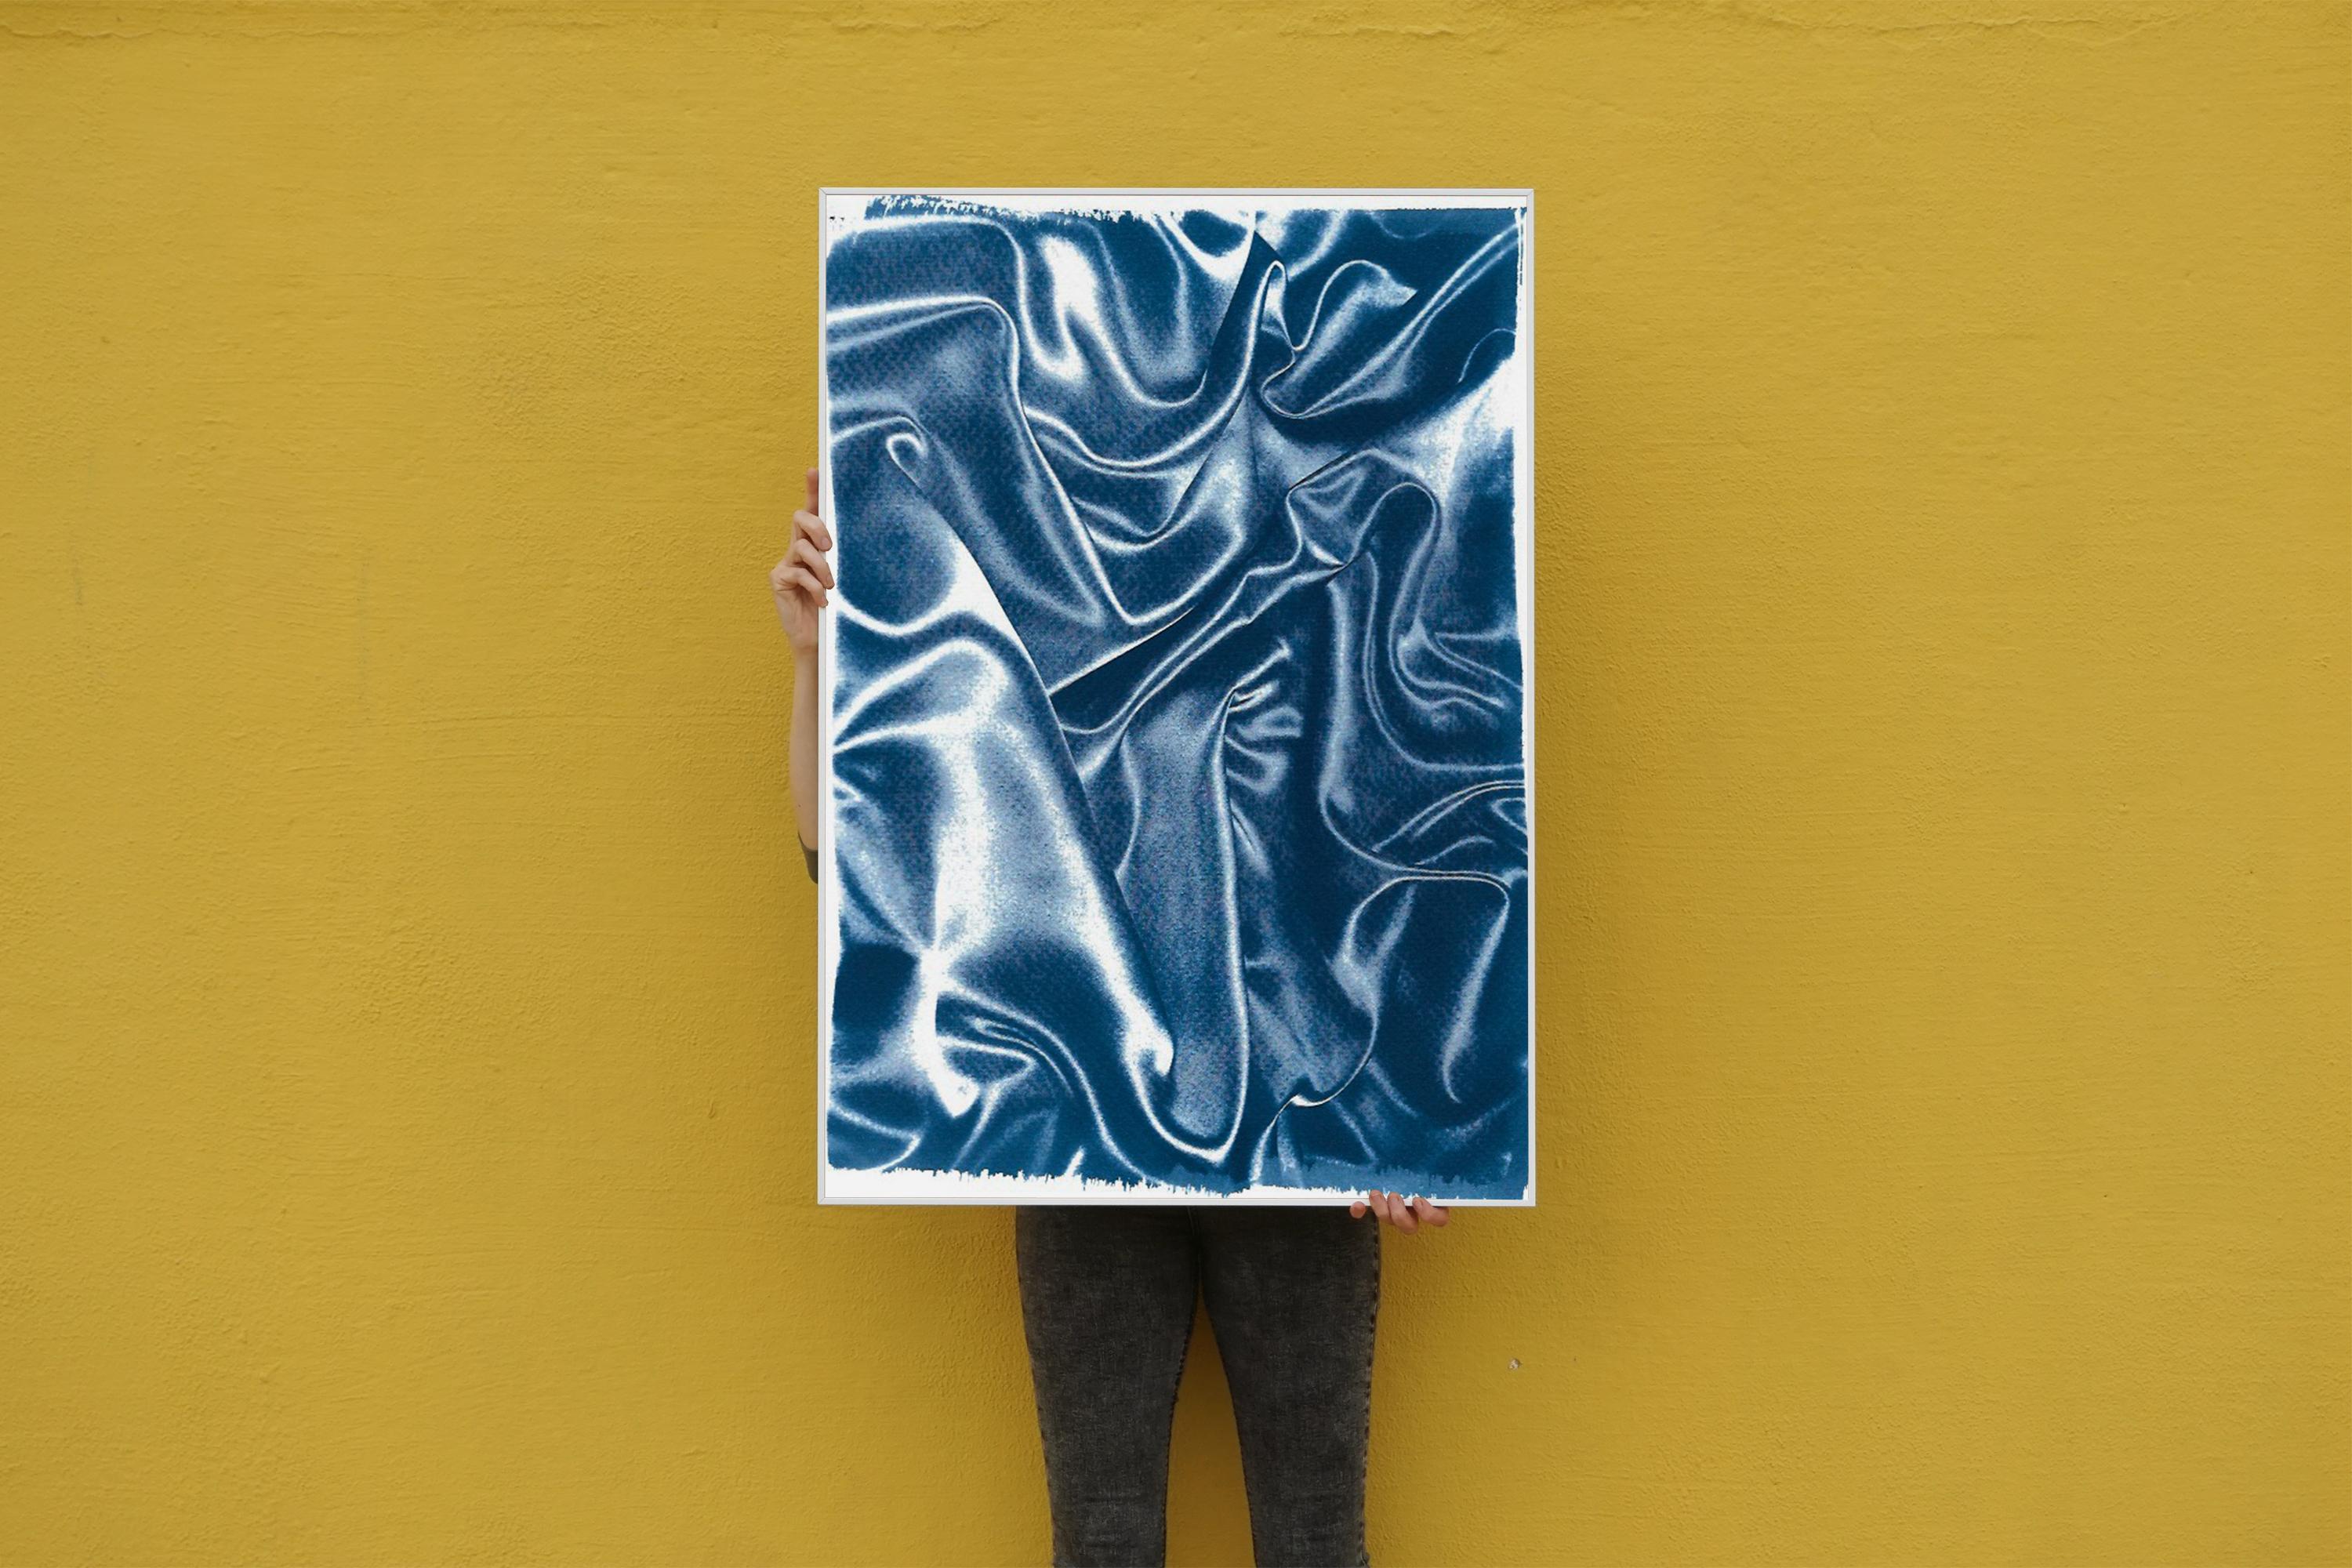 This is an exclusive handprinted limited edition cyanotype.

Details:
+ Title: Classic Blue Silk Movement nº1
+ Year: 2021
+ Edition Size: 100
+ Stamped and Certificate of Authenticity provided
+ Measurements : 70x100 cm (28x 40 in.), a standard